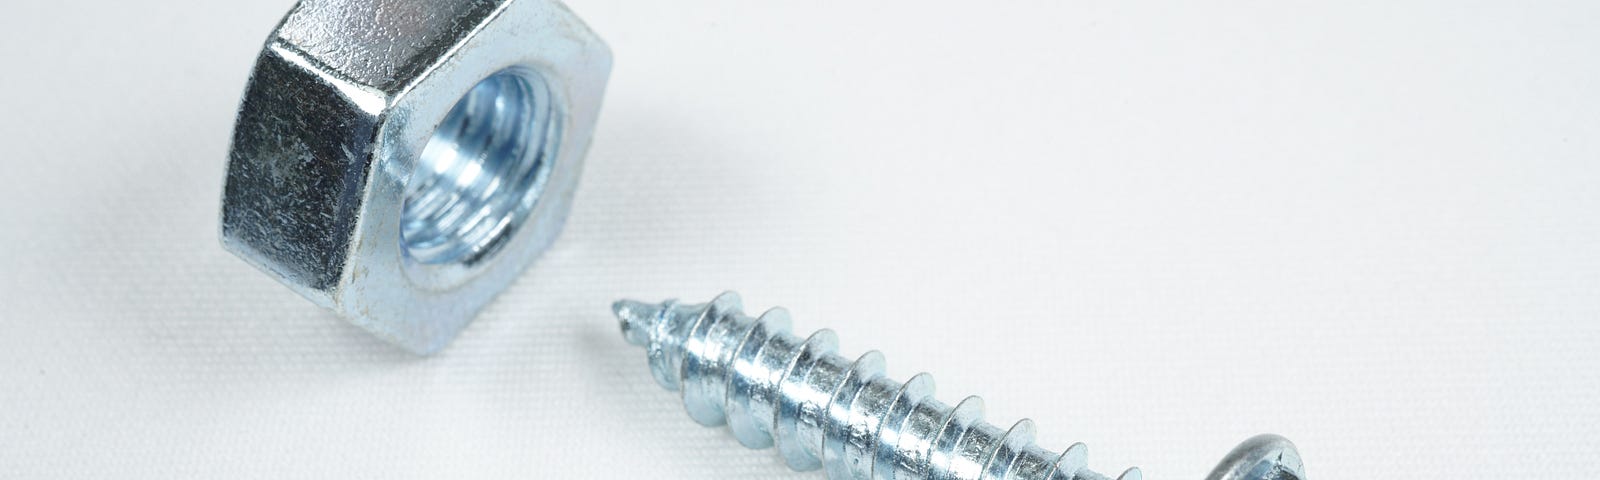 a screw and nut